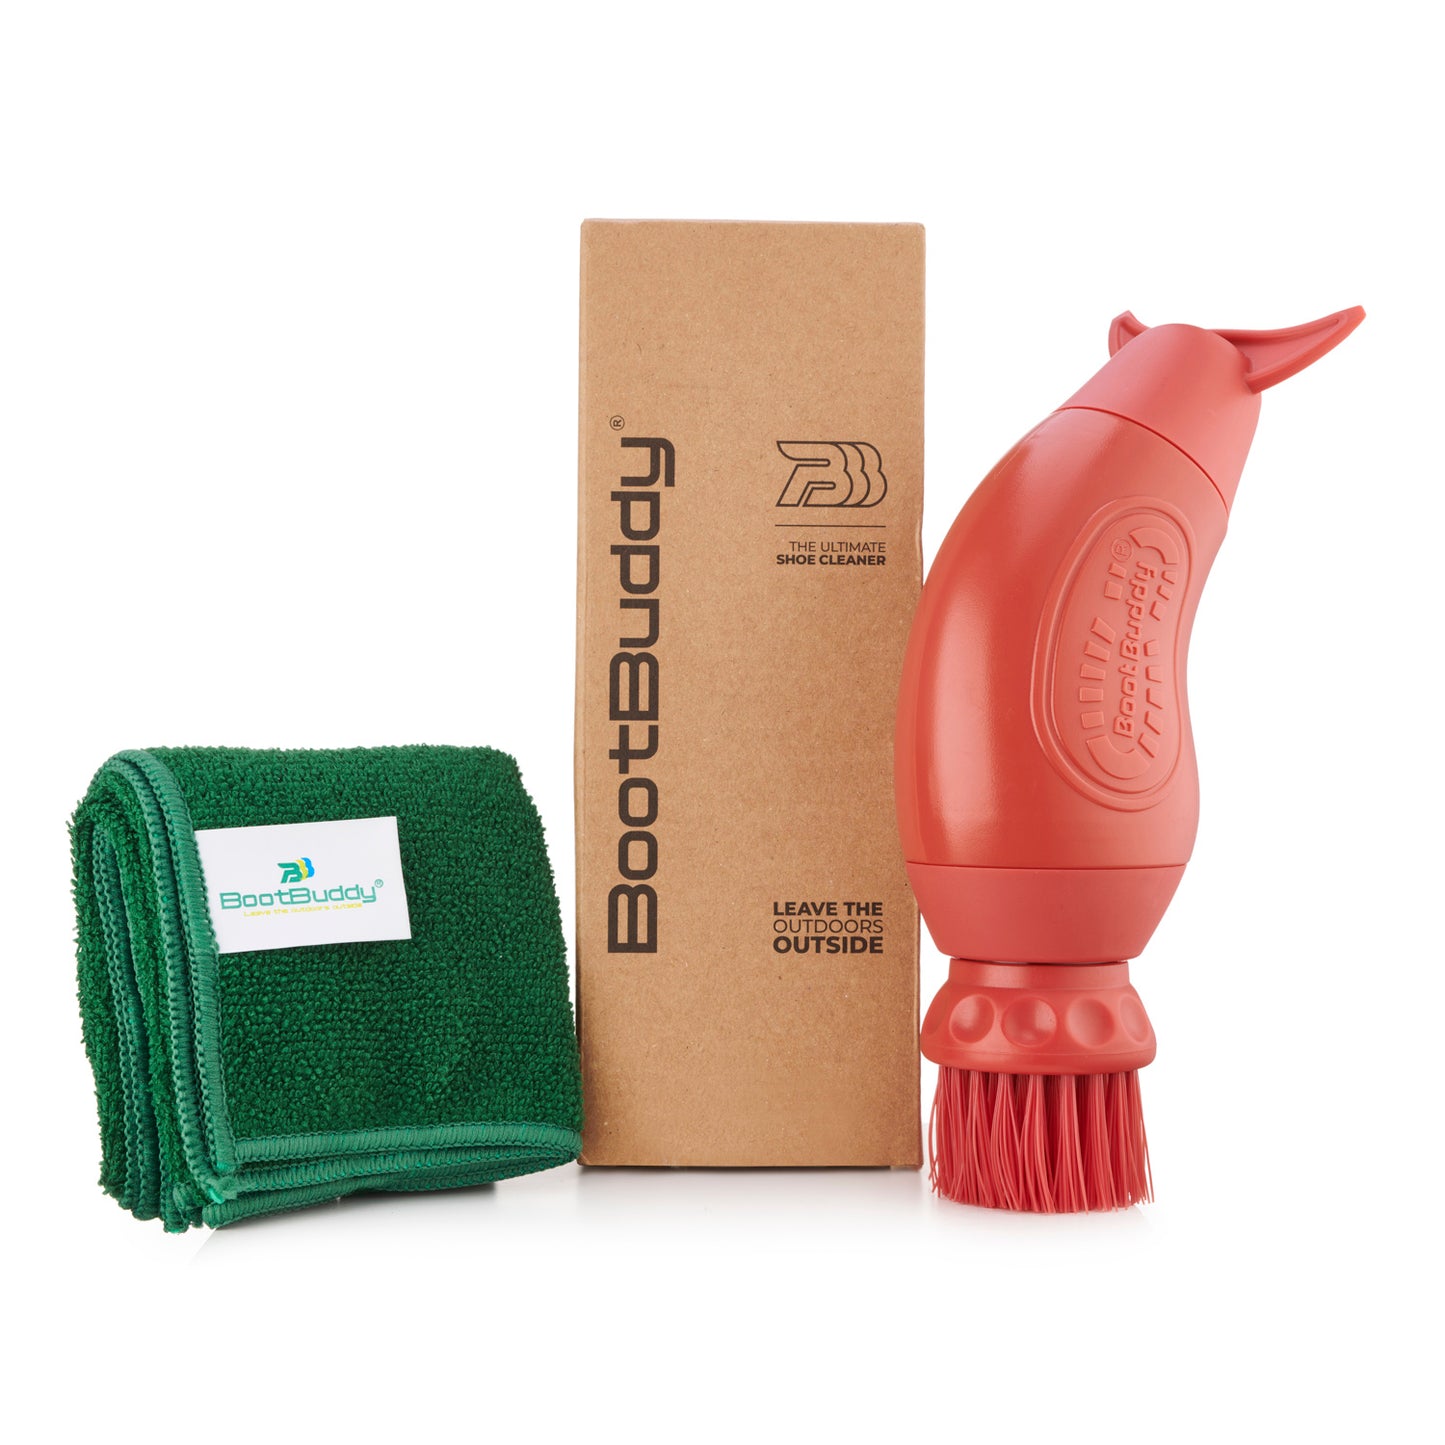 Boot Buddy Shoe Cleaner with cleaning towel & box